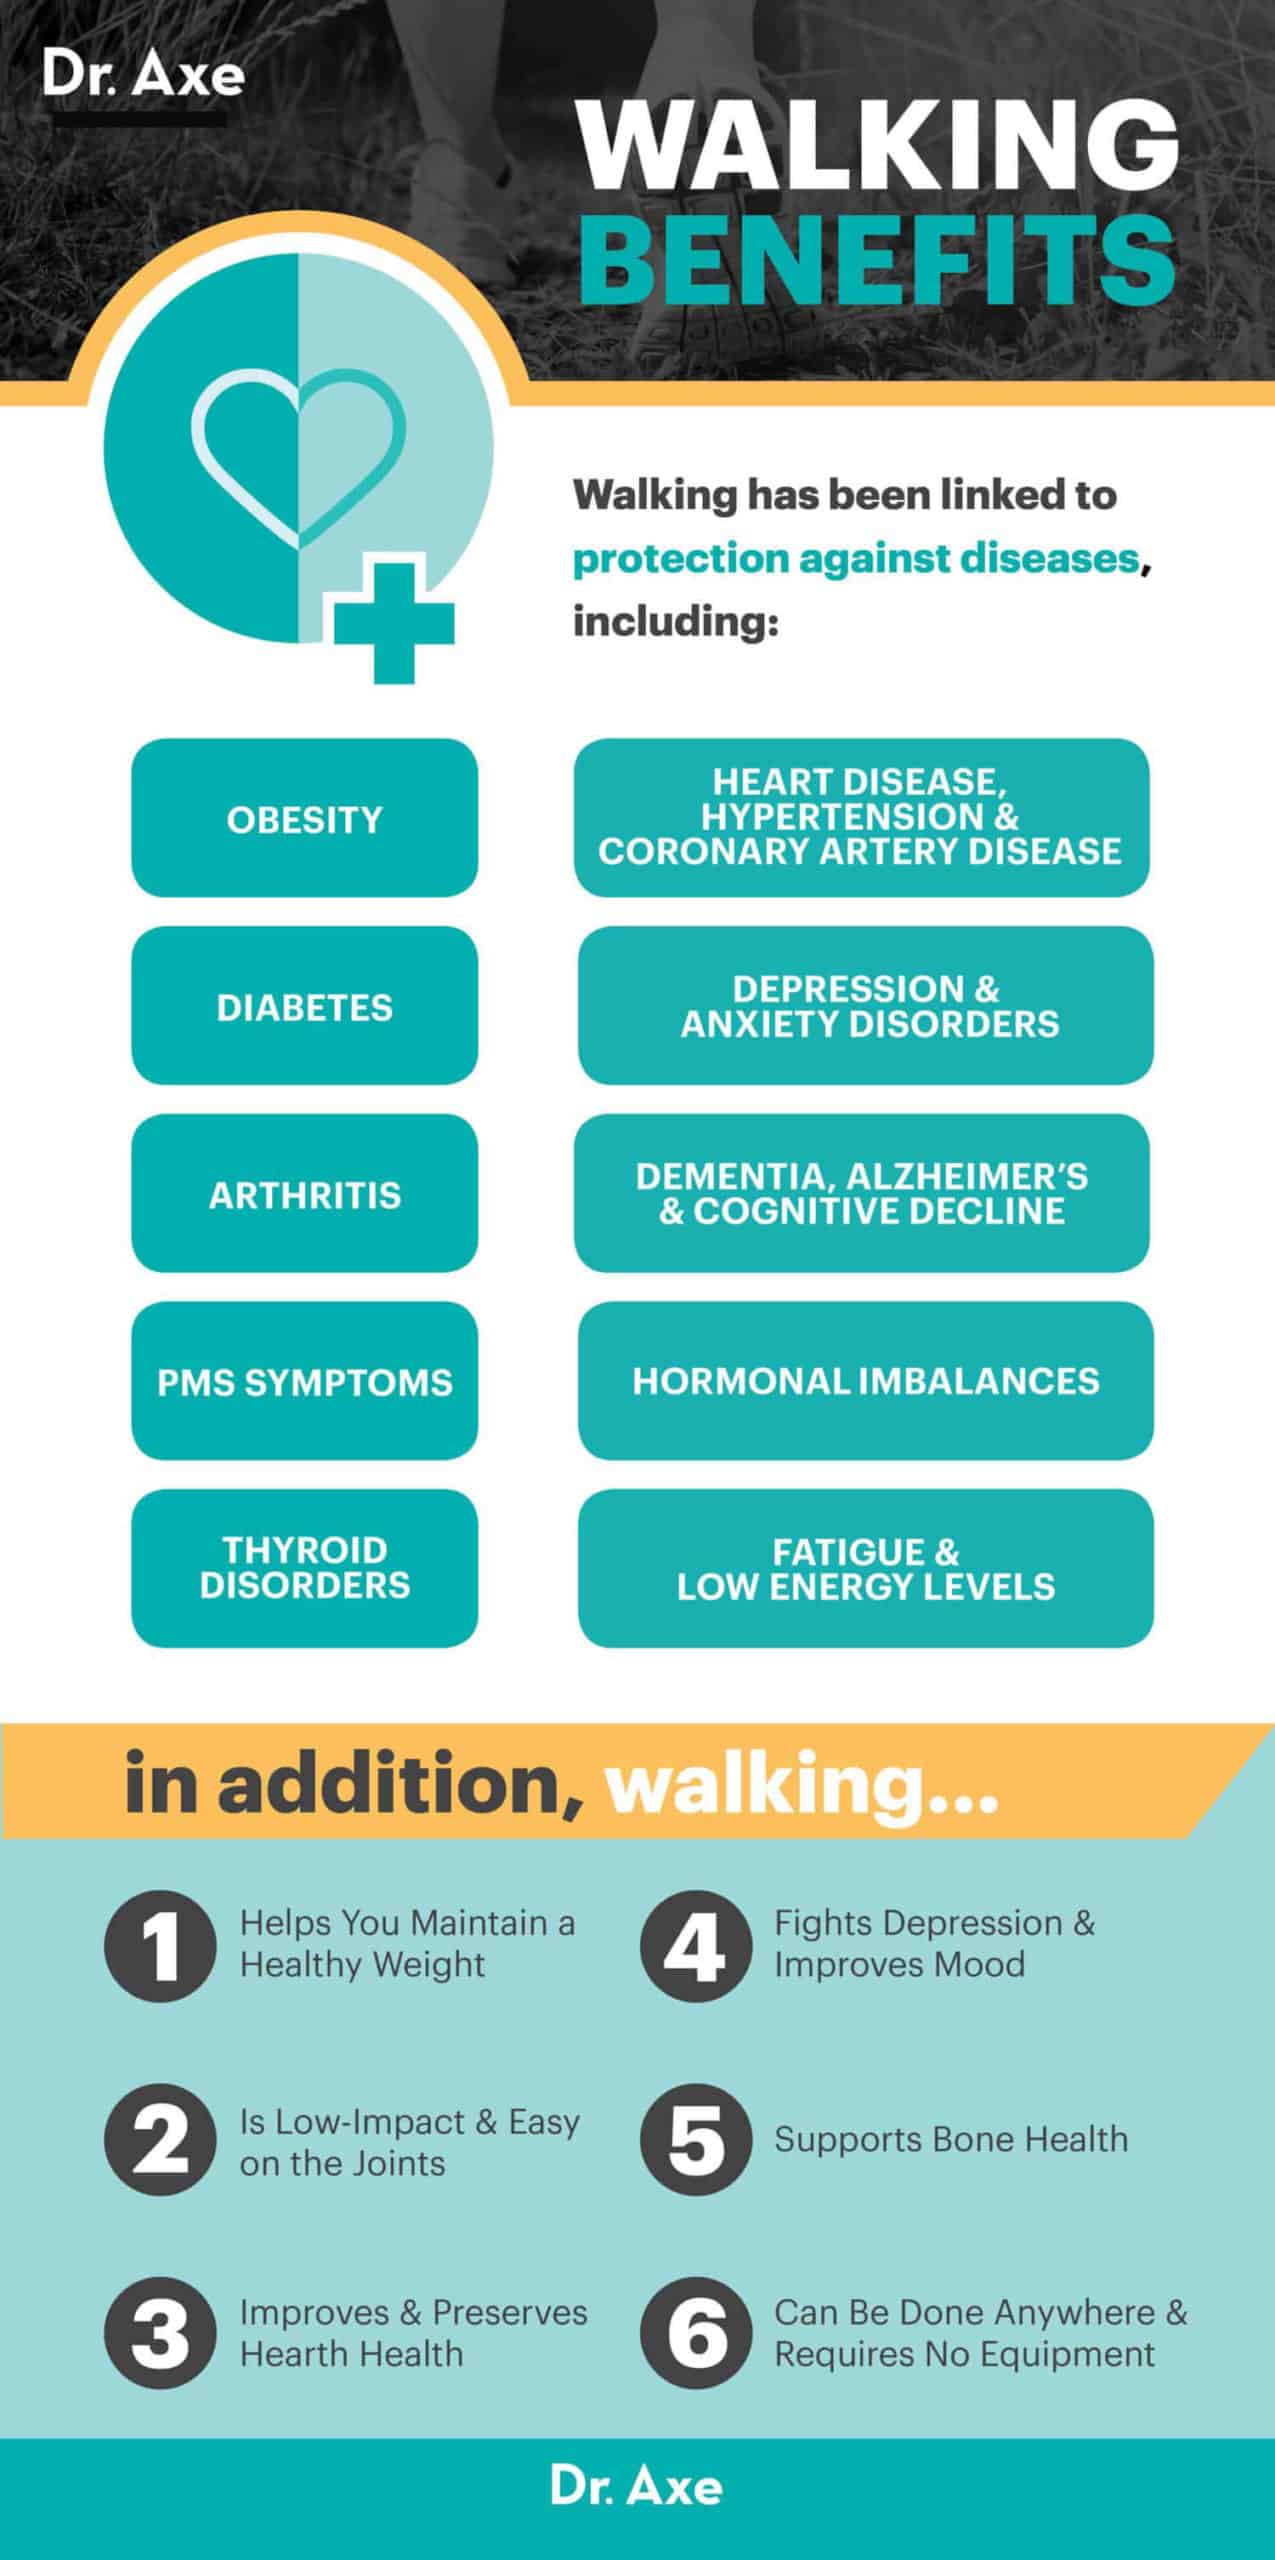 Walking to lose weight - Dr. Axe